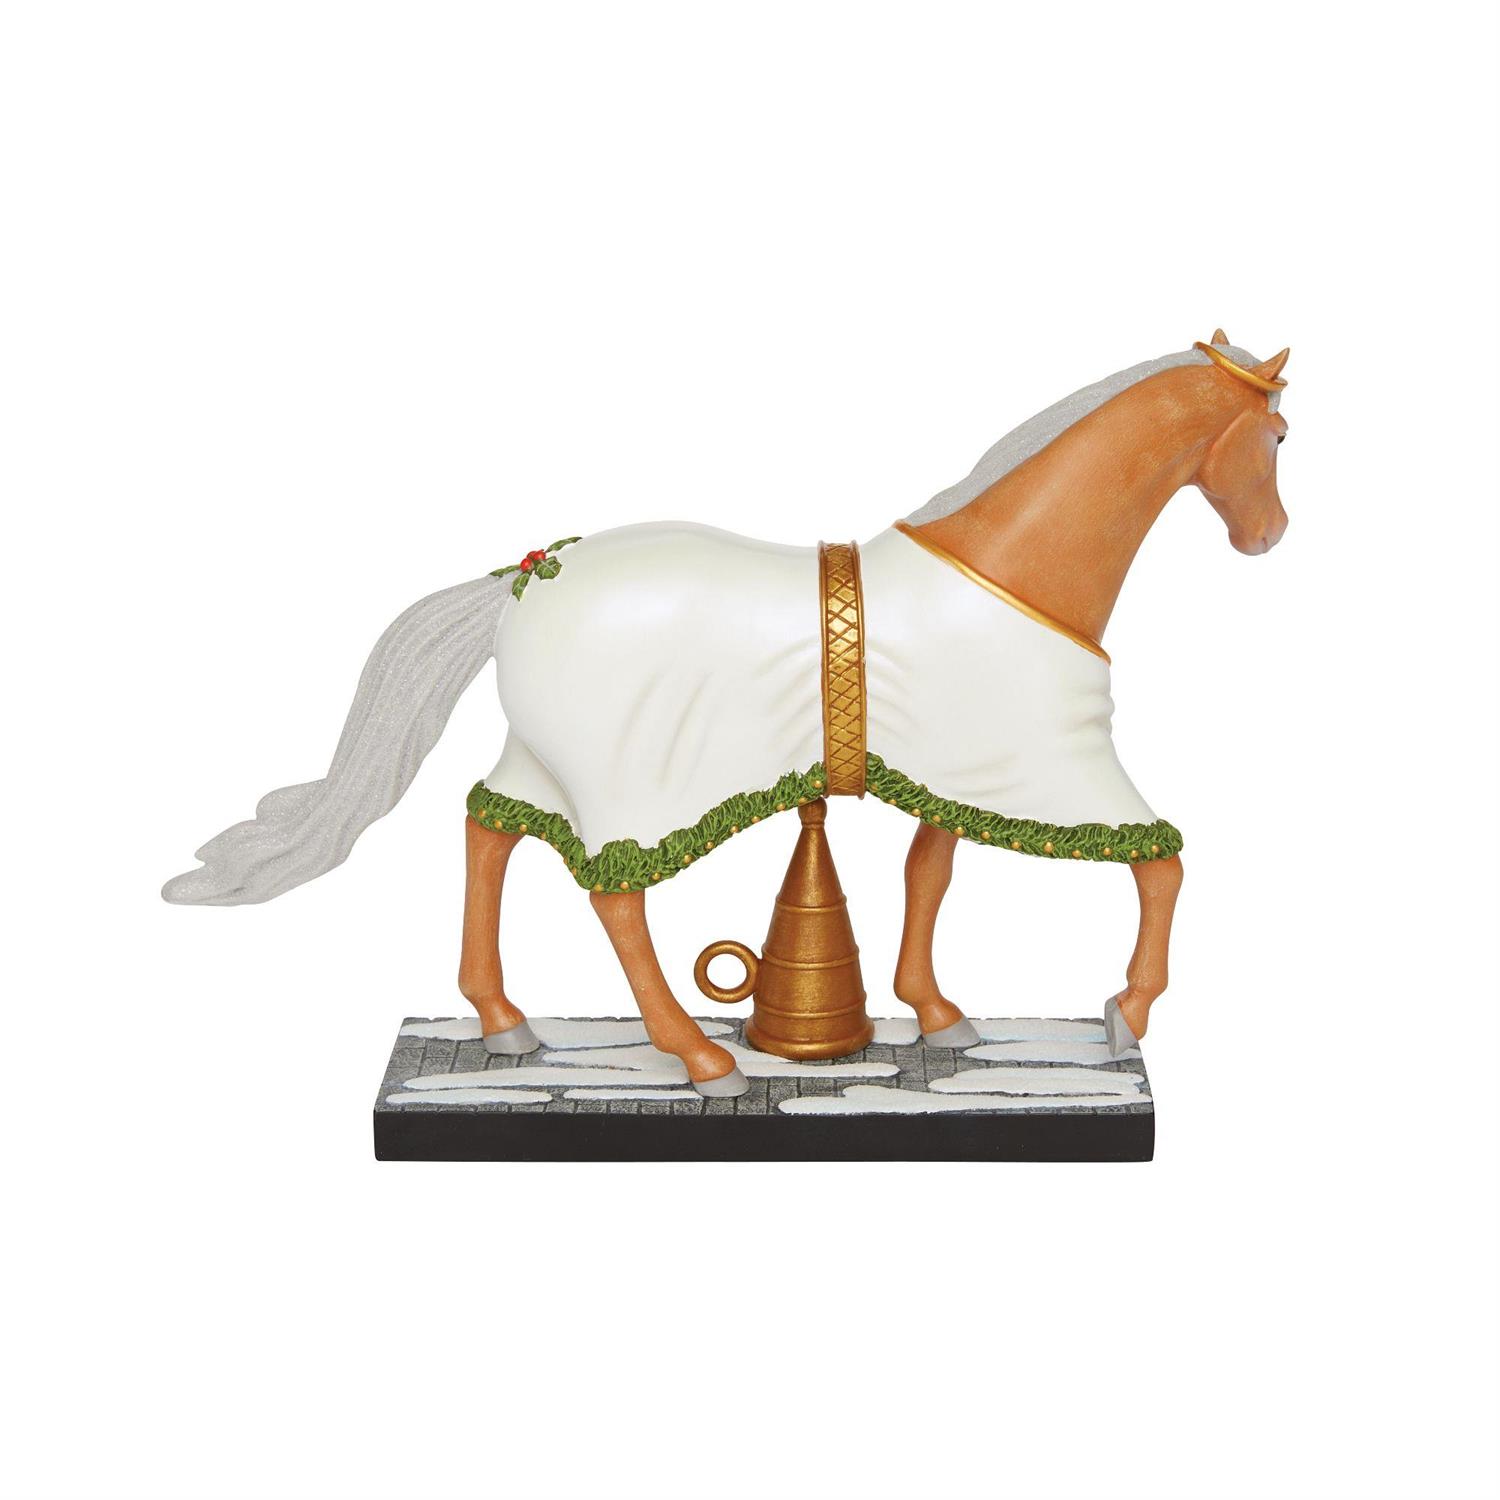 Enesco Gifts Trail Of Painted Ponies Spirit of Christmas Past Figurine Free Shipping Iveys Gifts And Decor